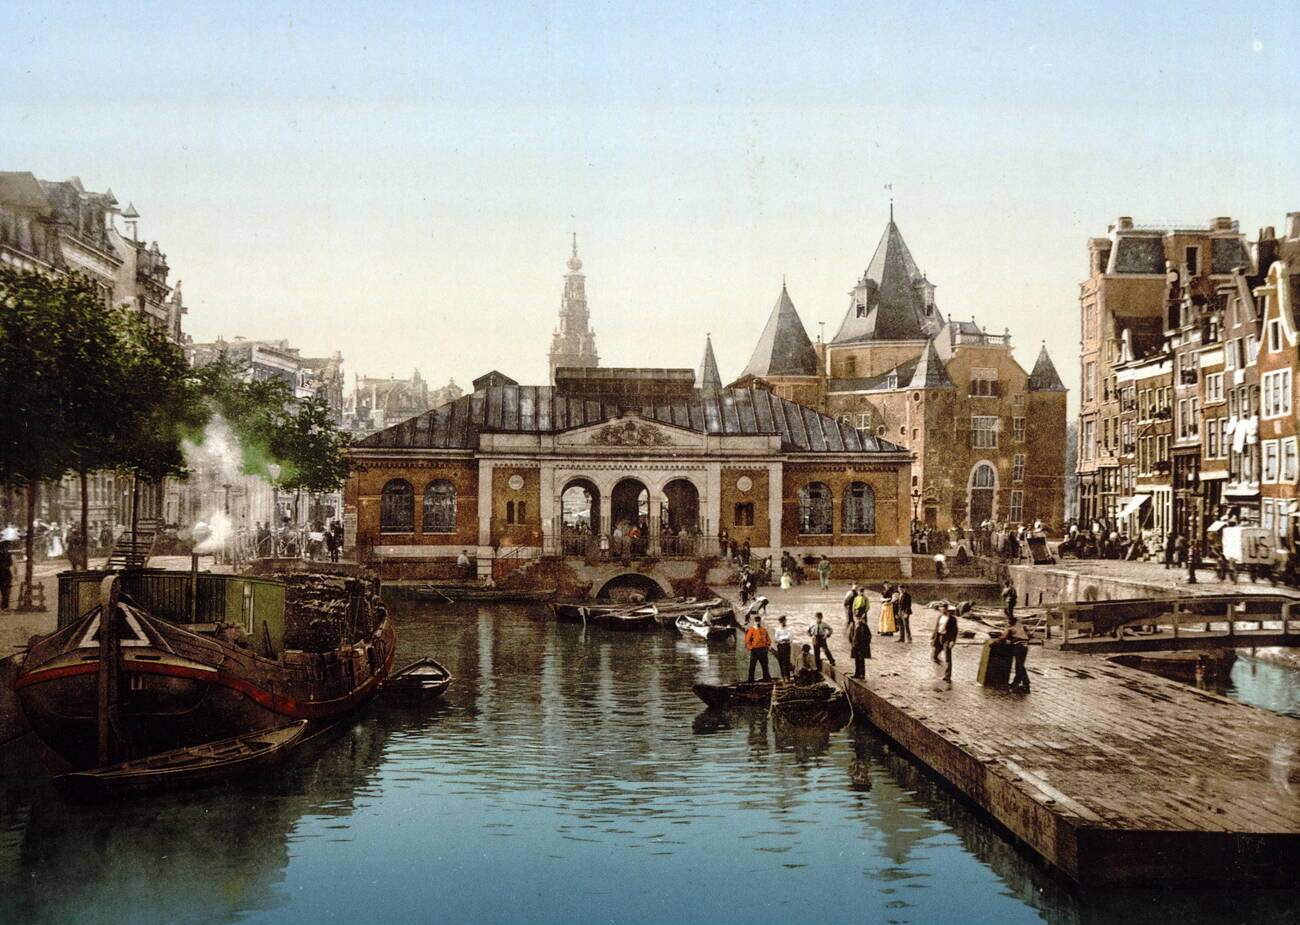 The Fish market and bourse (weighing house), Amsterdam, 1900